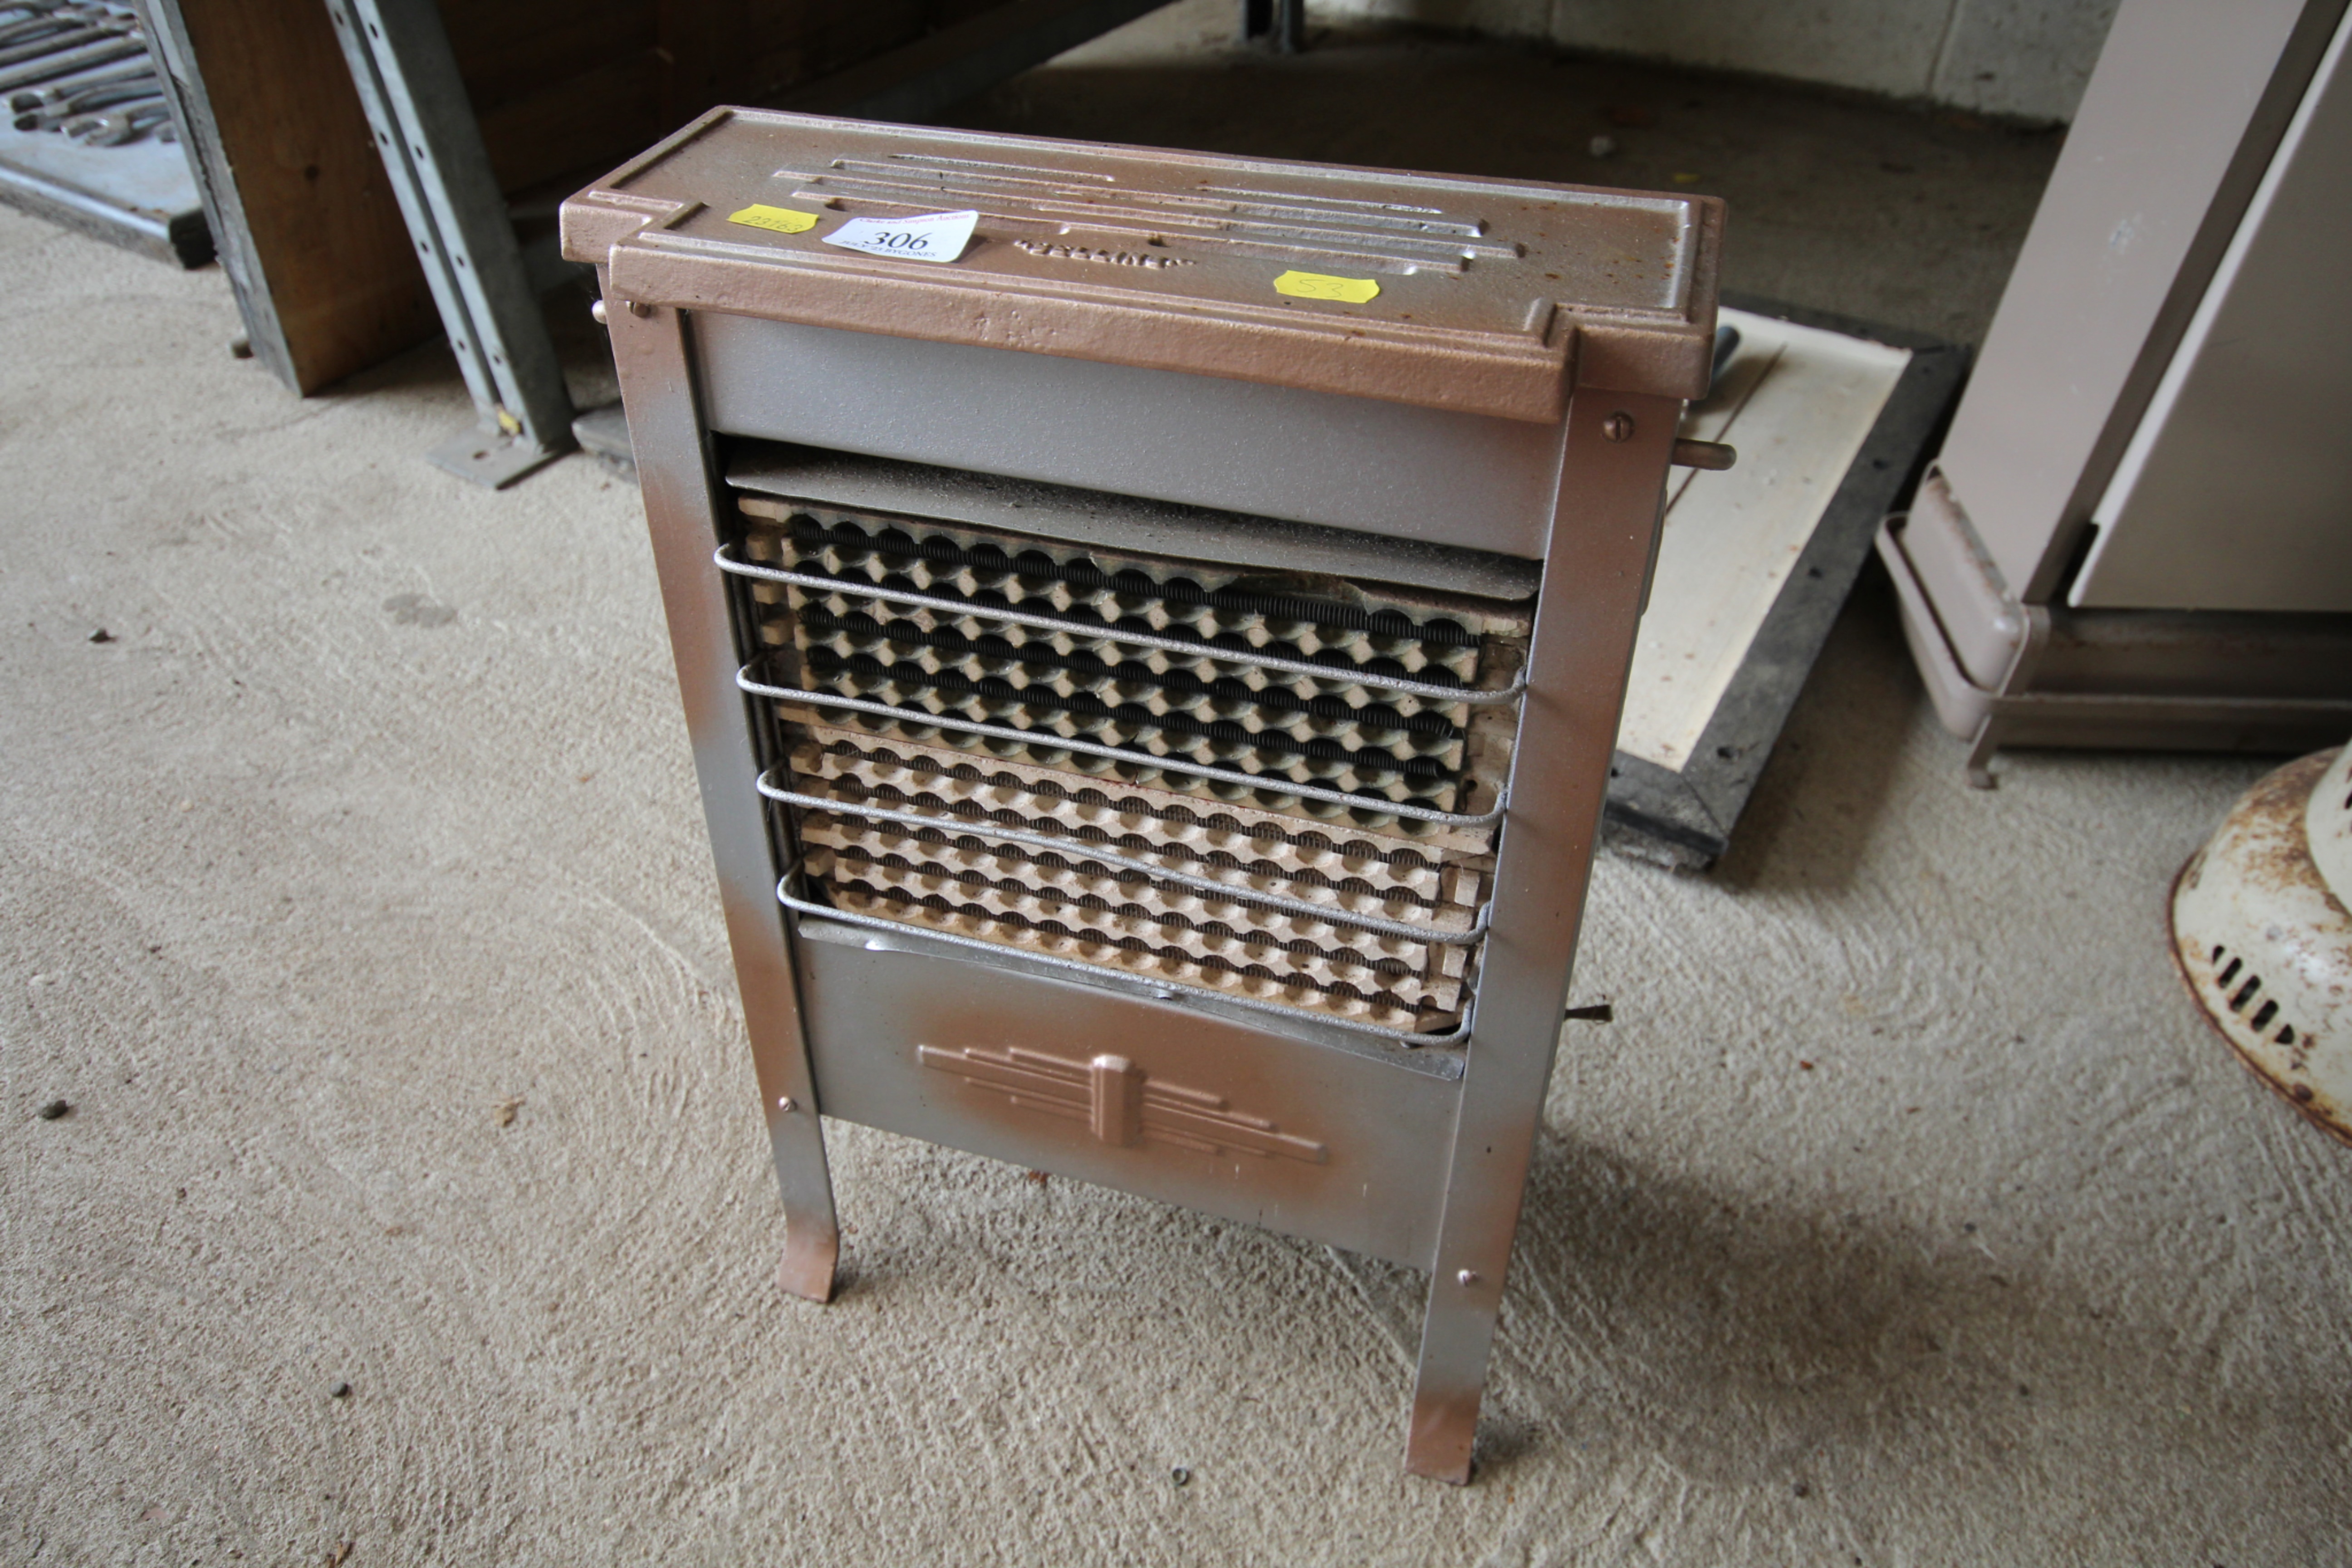 A Belling Art Deco electric fire - sold as a colle